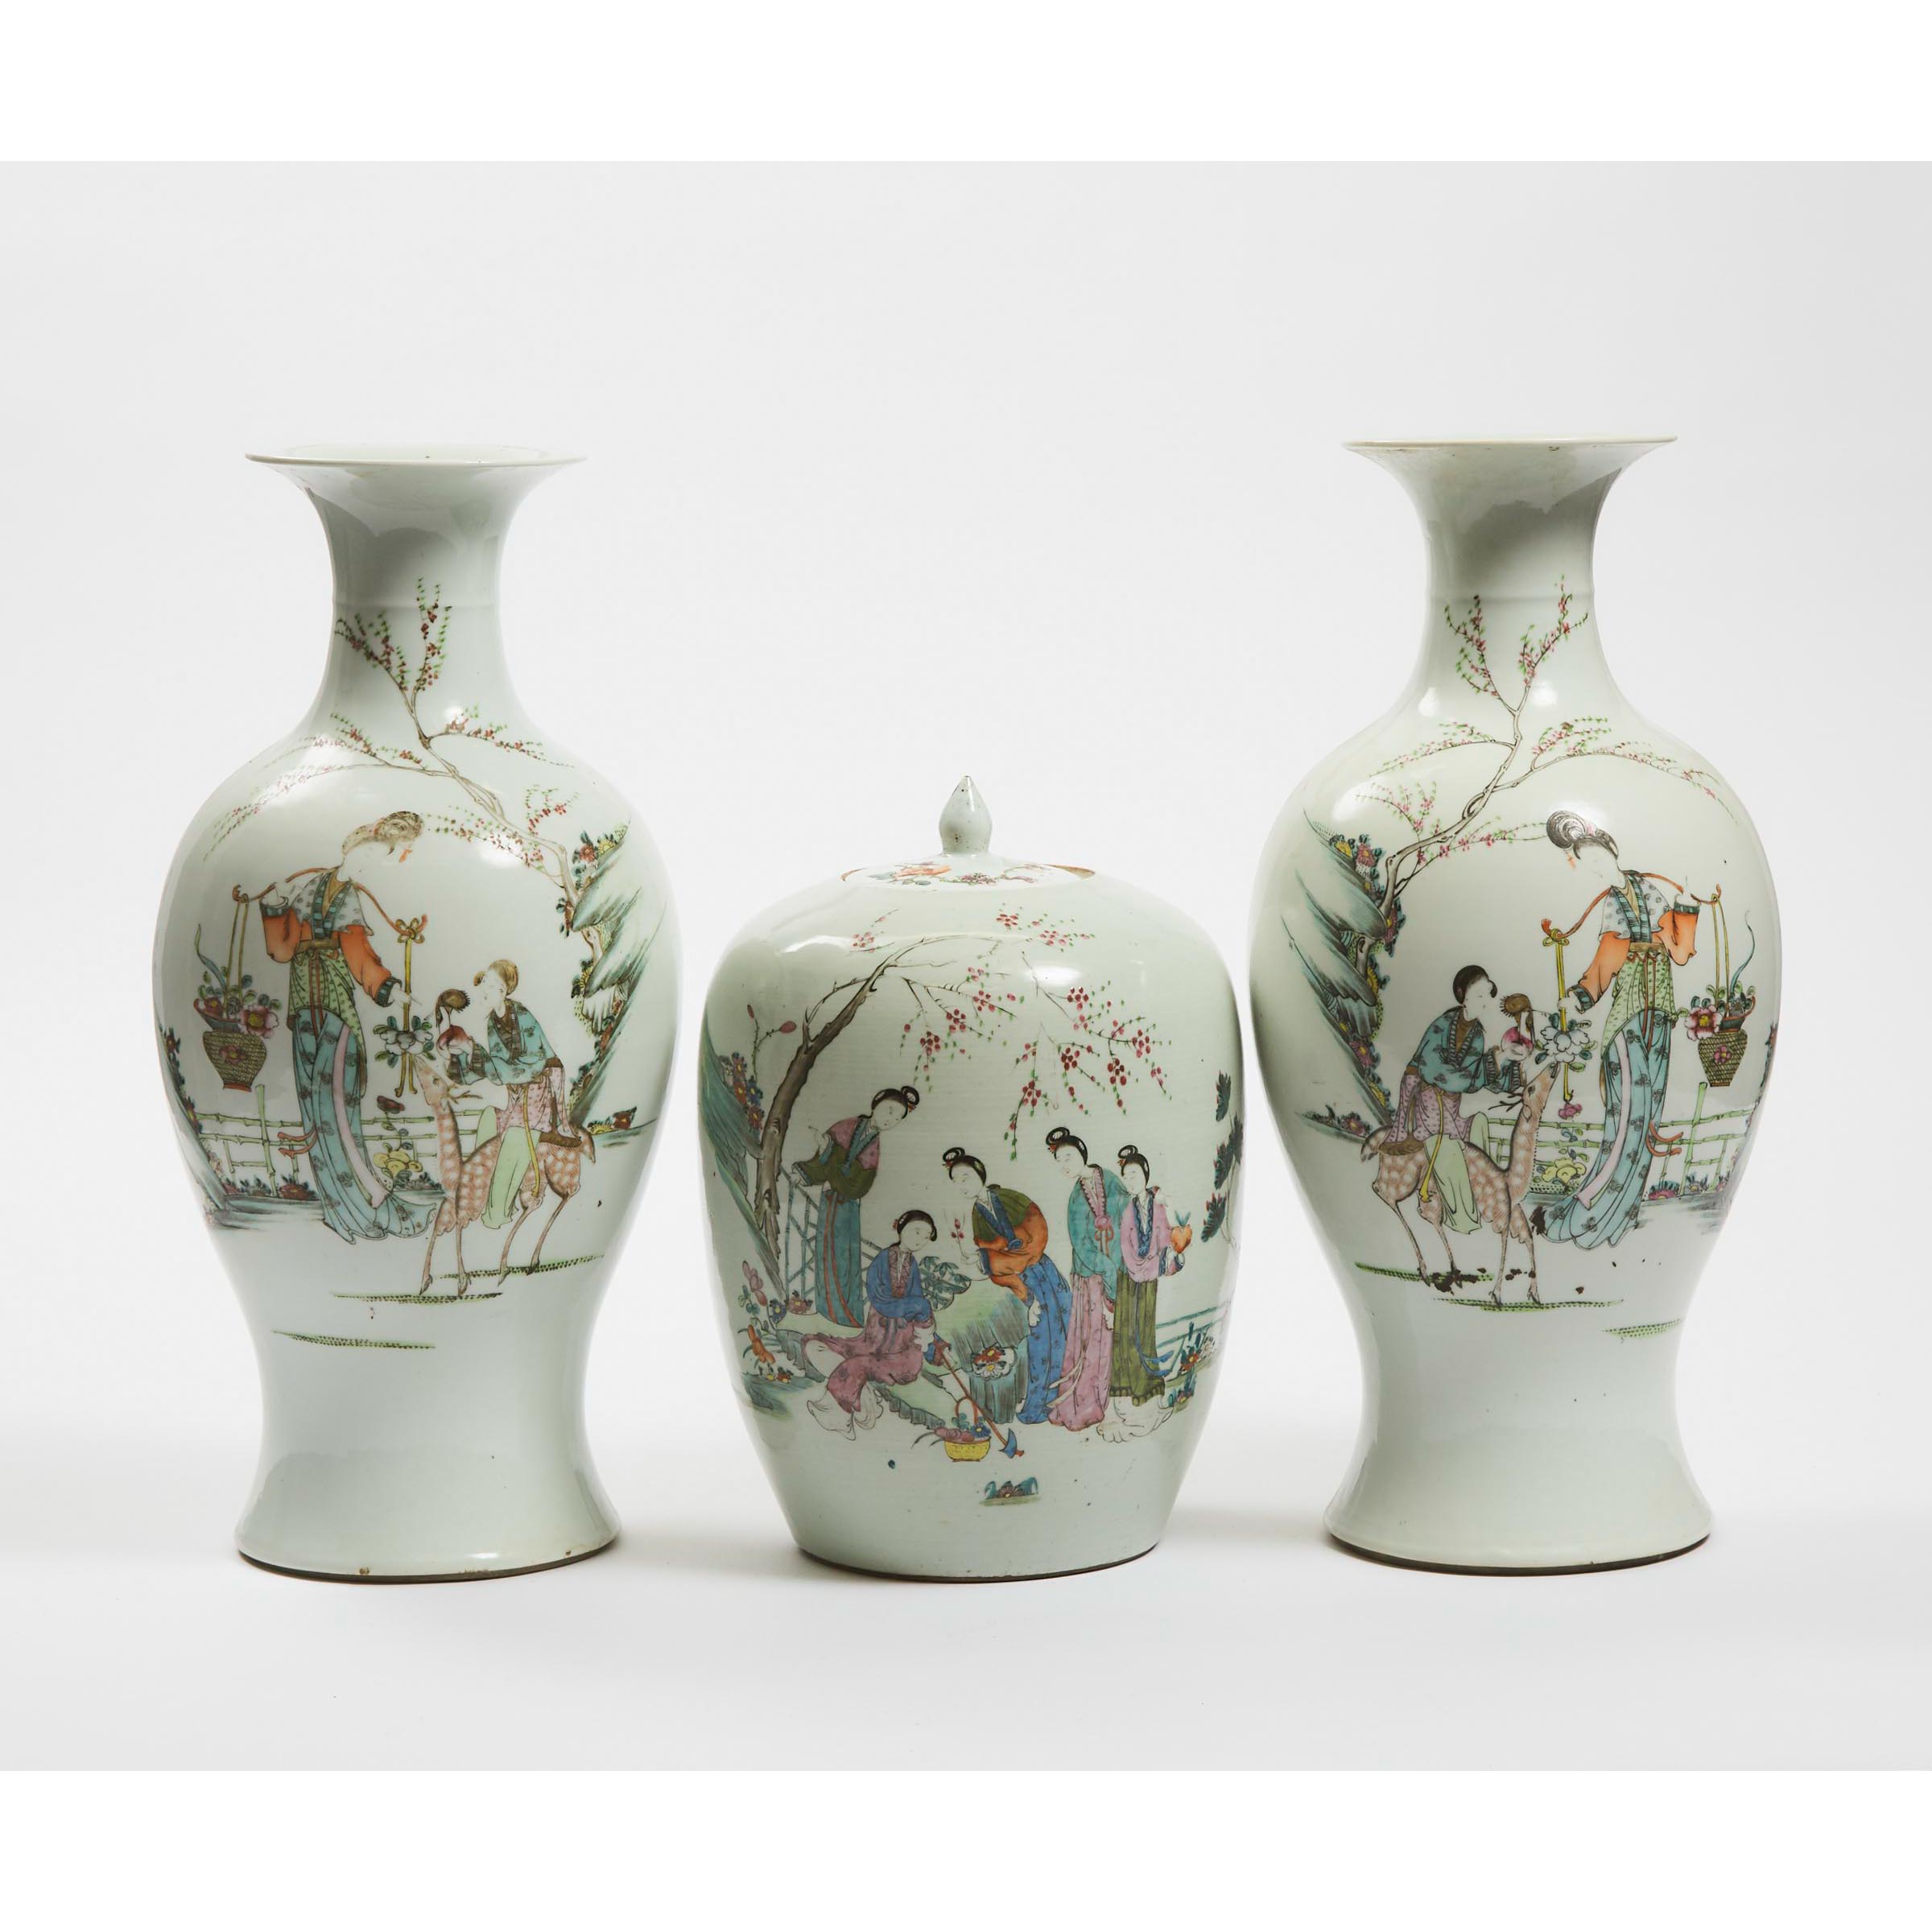 A Pair of Famille Rose Vases, Together